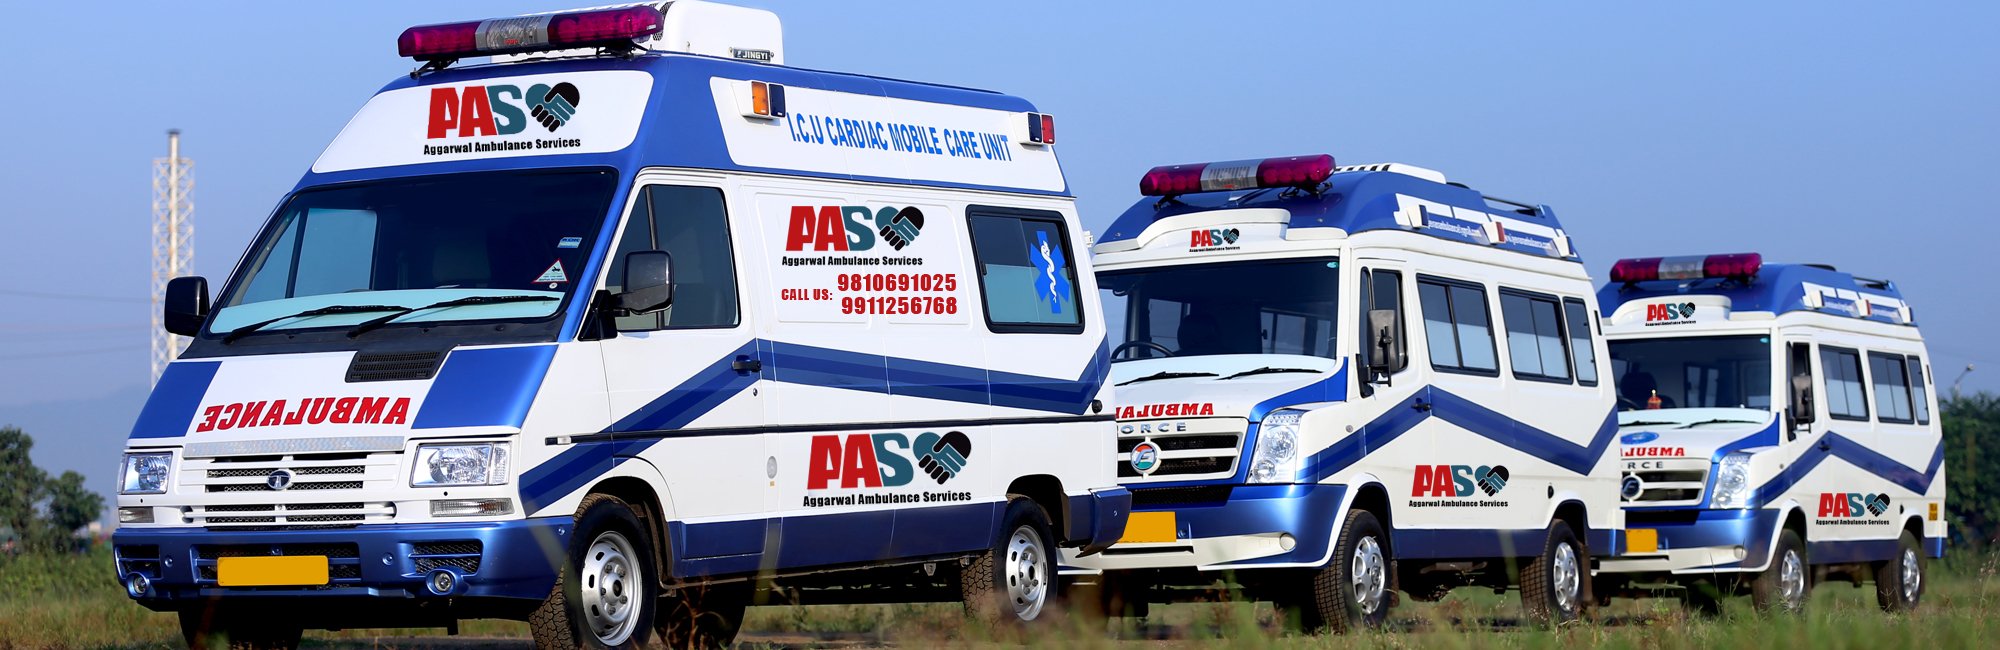 Ambulance Services in Rural Areas : Bridging the Healthcare Gap